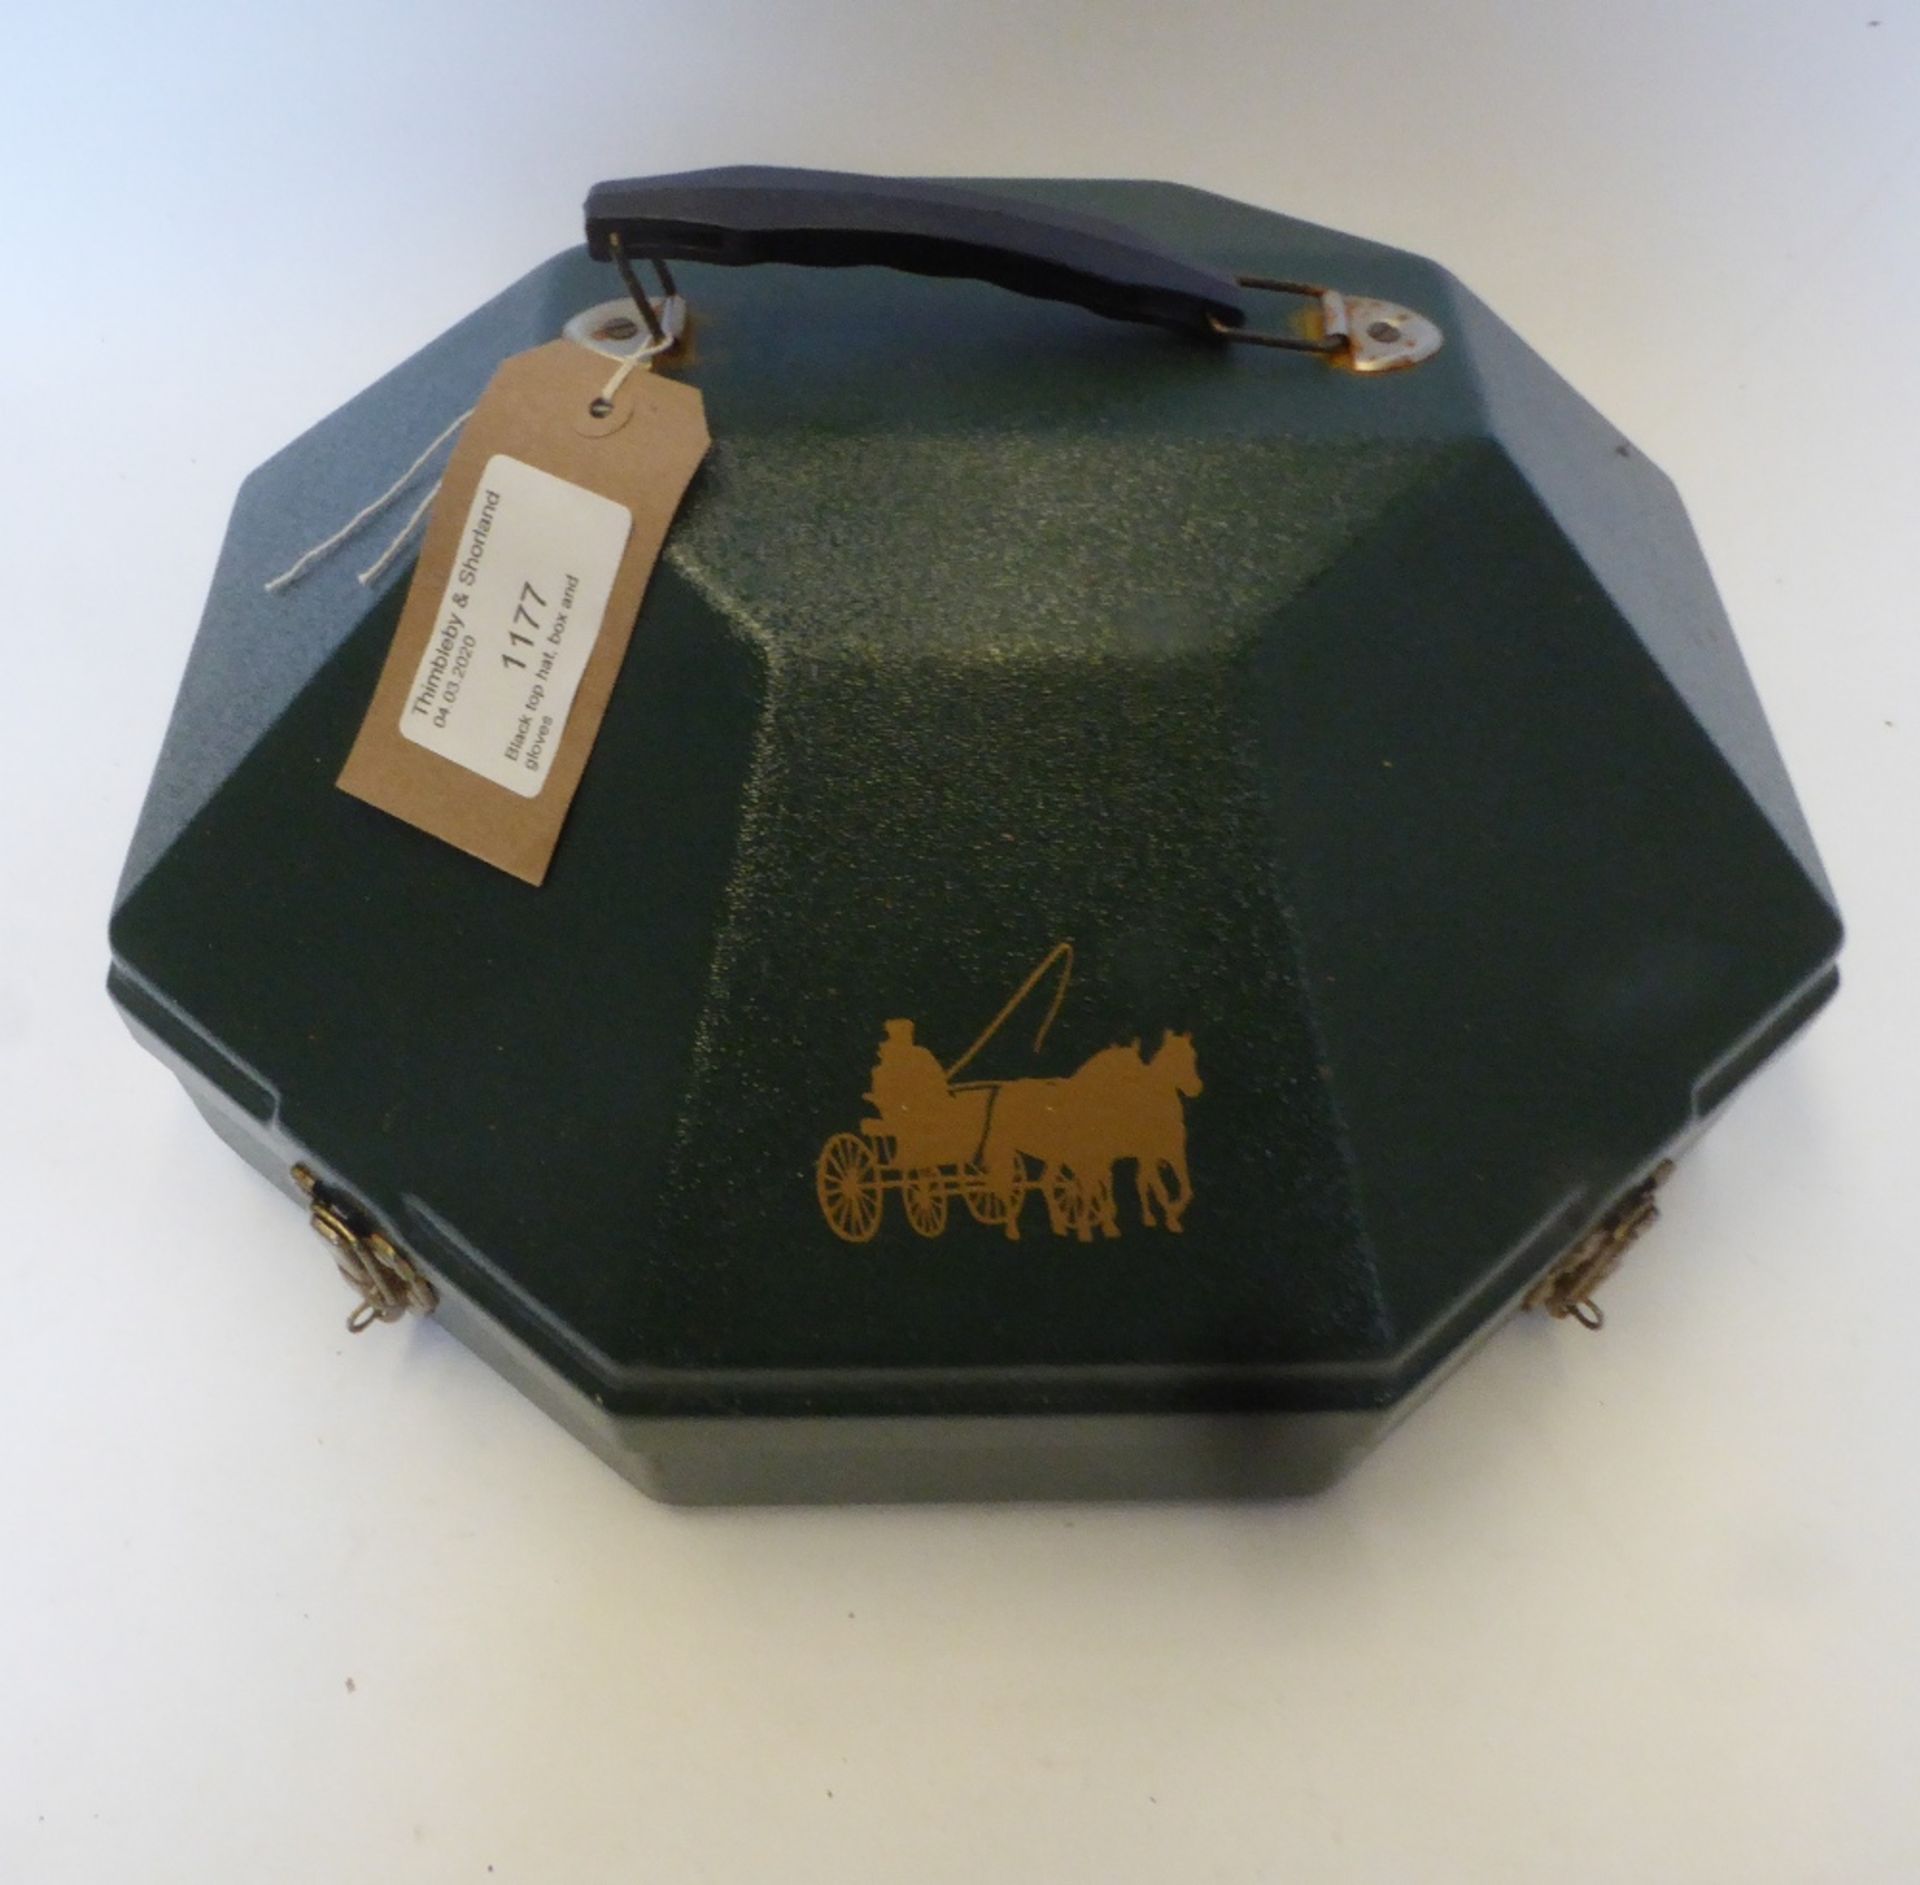 Black top hat by Hope Bros., London with a green hat box, plus a pair of brown leather gloves